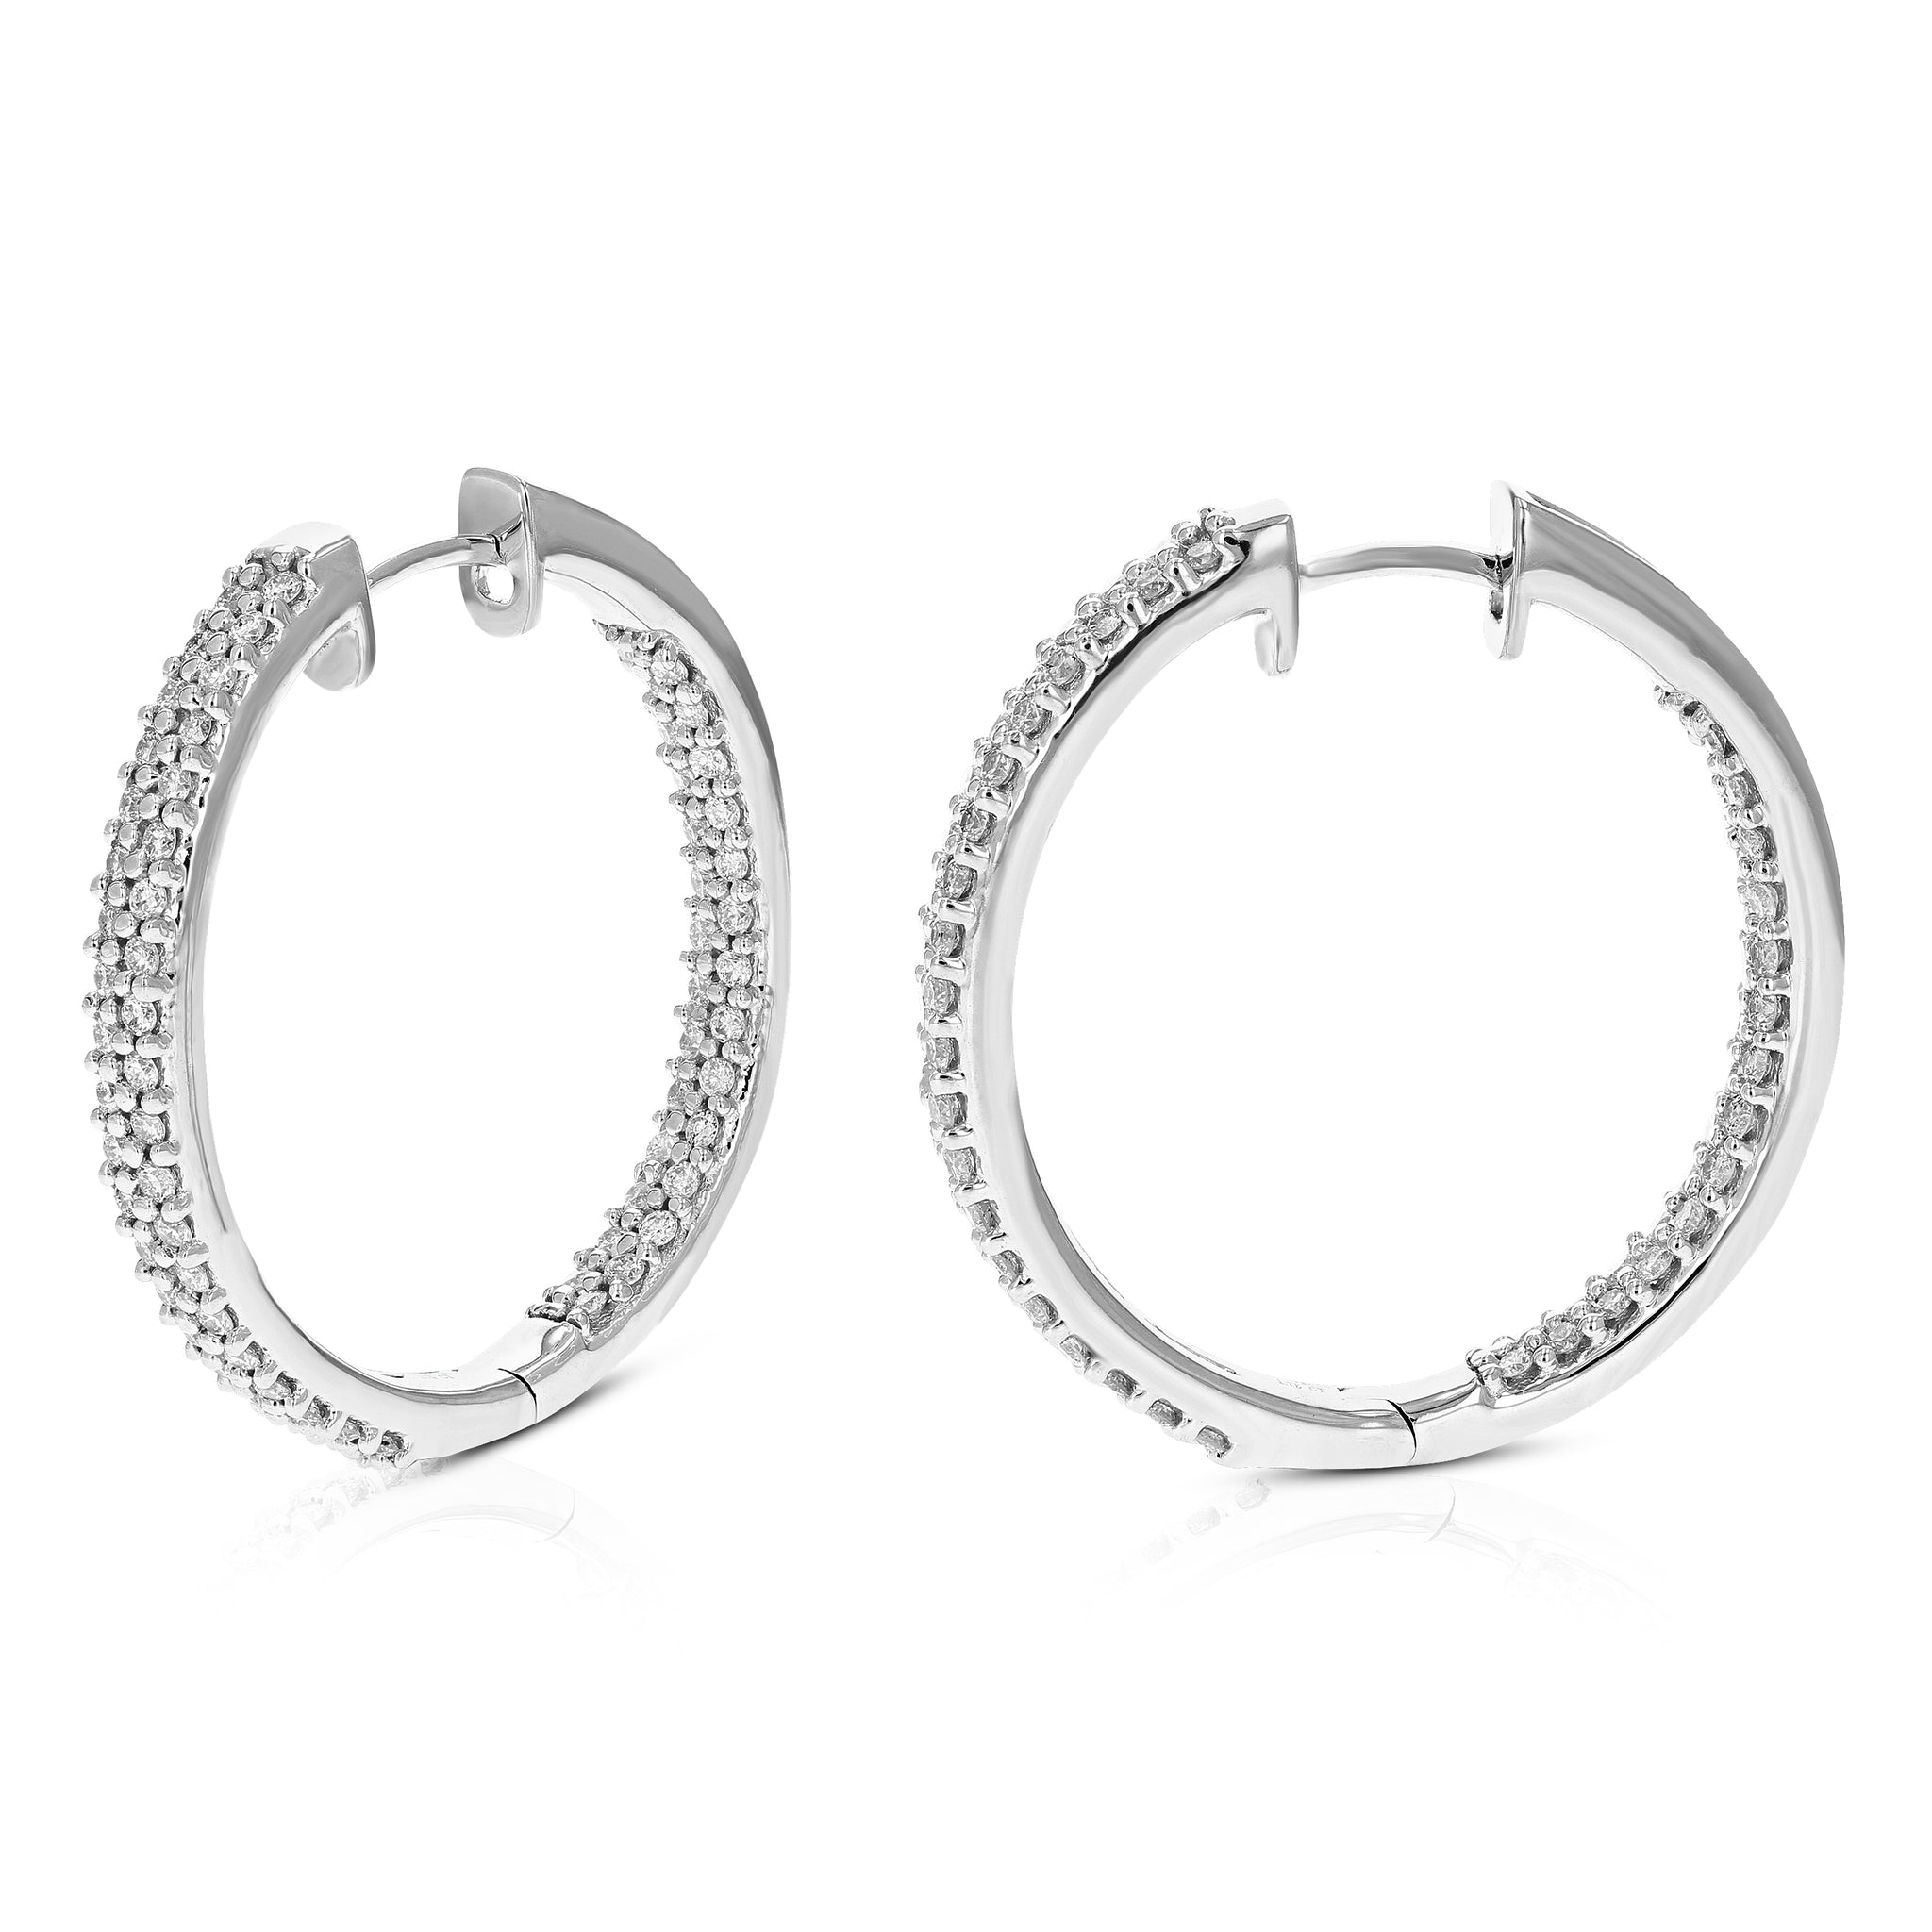 DollsofIndia Black with Multicolor Meenakari Metal Hoop Earrings for Women  - Length - 1.75 inches (RW91) : Amazon.in: Fashion